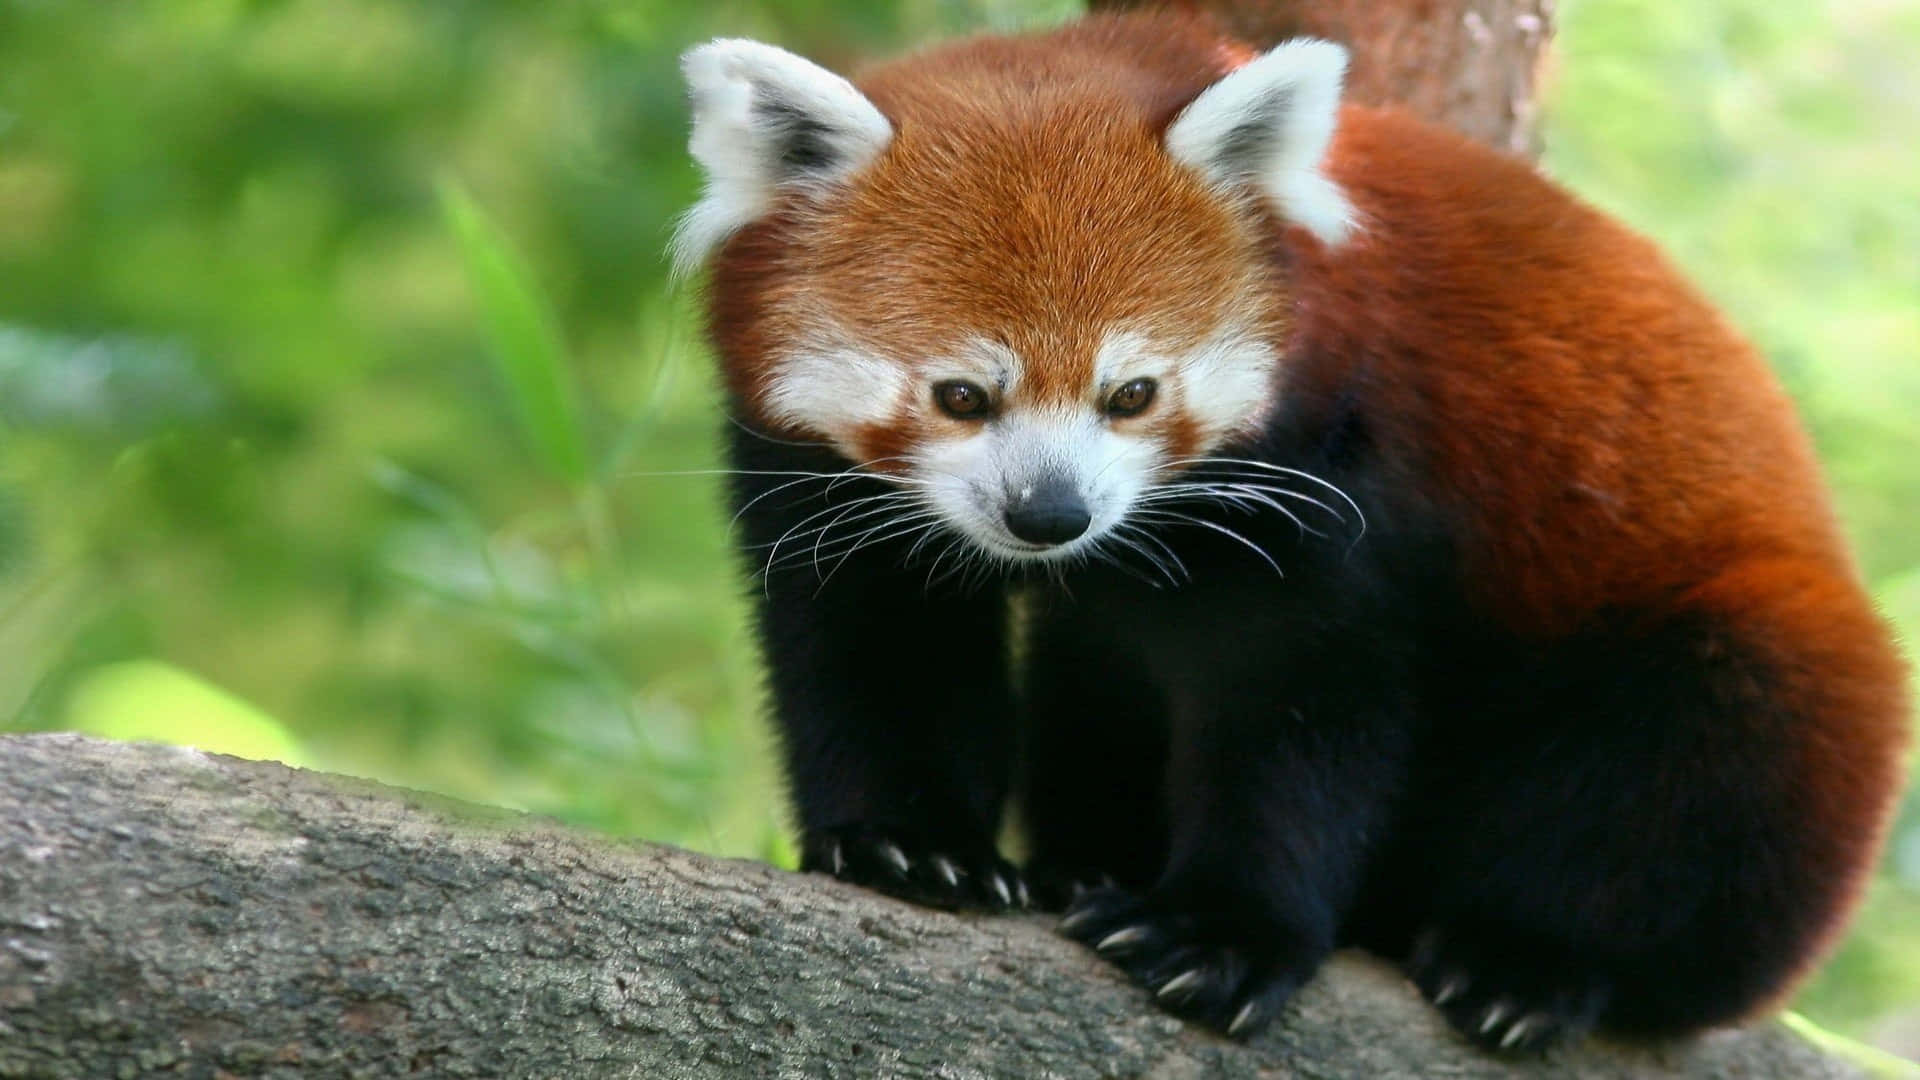 Red Panda resting on its back in bamboo forest